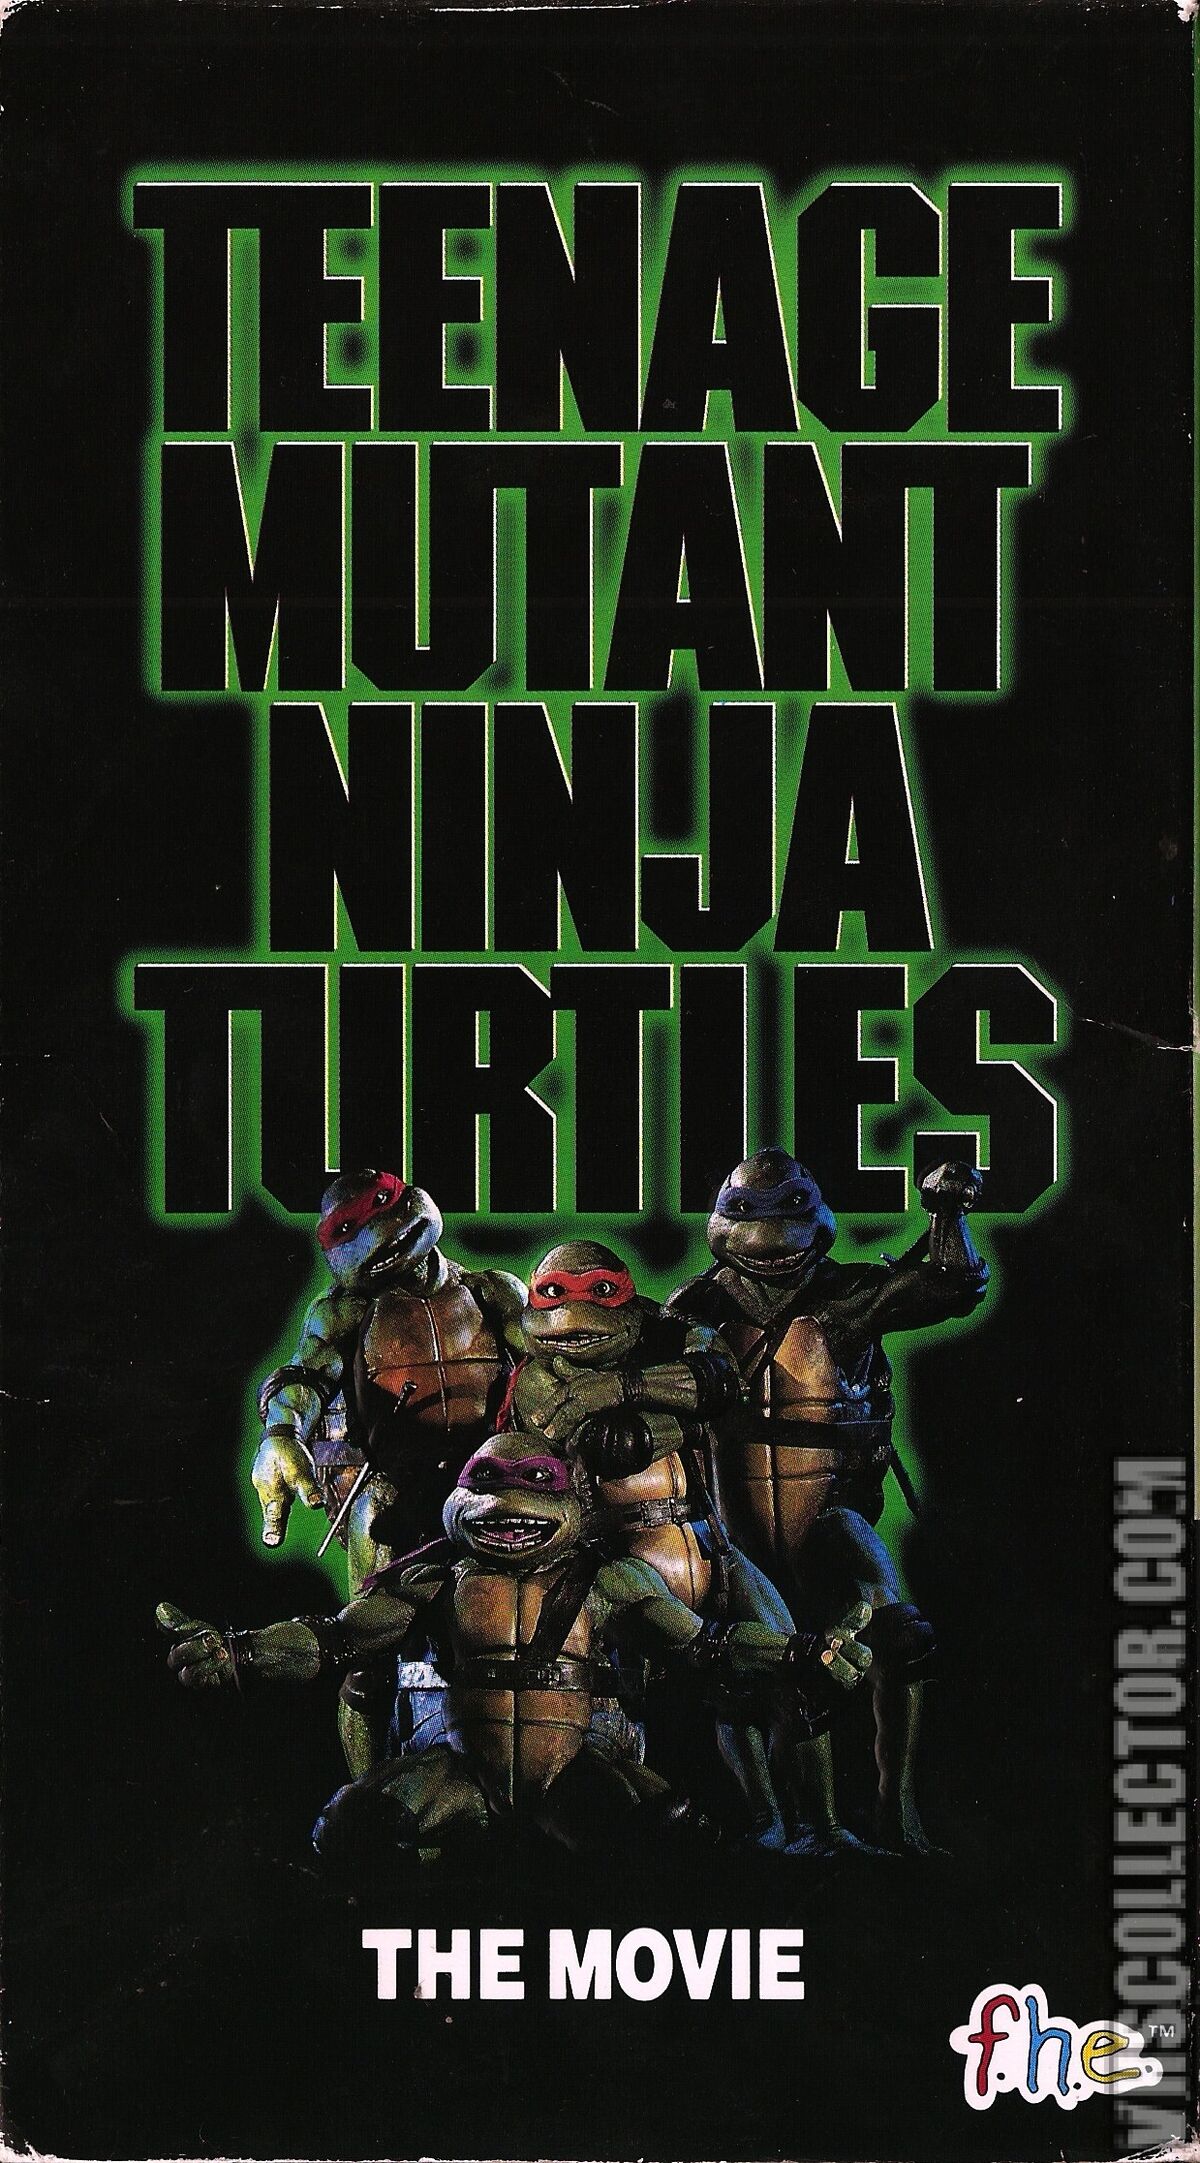 https://static.wikia.nocookie.net/filmguide/images/6/69/22955_TMNT_FHE_Front.jpg/revision/latest/scale-to-width-down/1200?cb=20220130233120